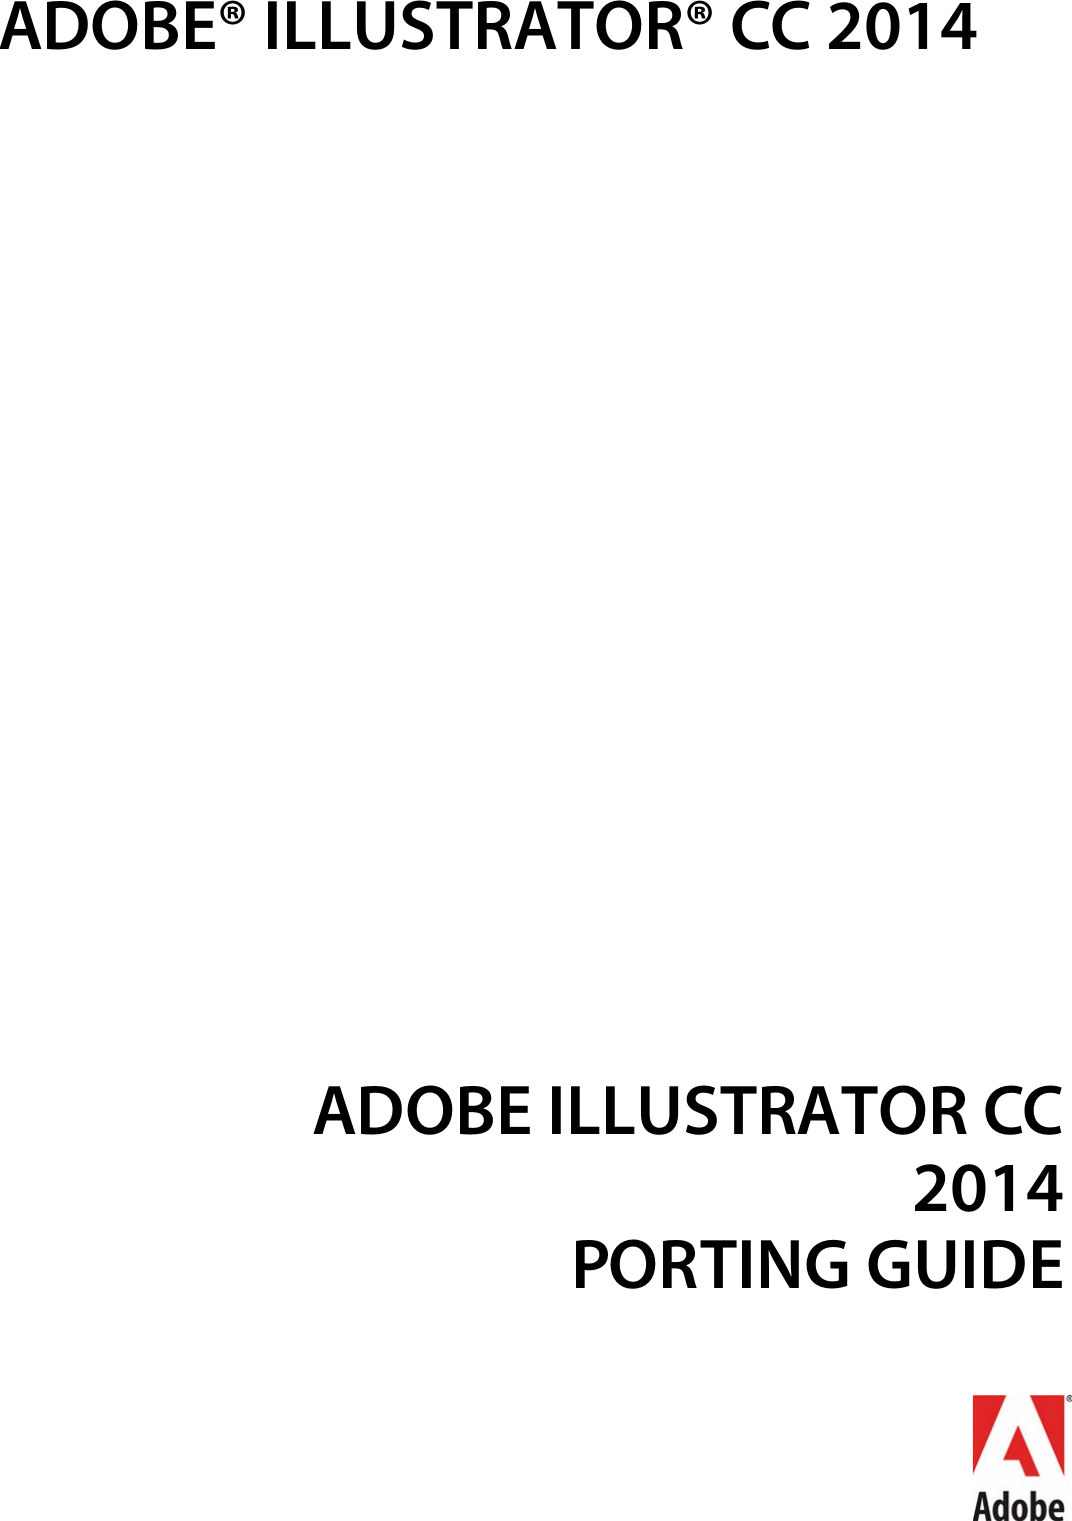 Page 1 of 6 - Adobe Illustrator CC 2014 Porting Guide - (2014) Porting-cc2014-en